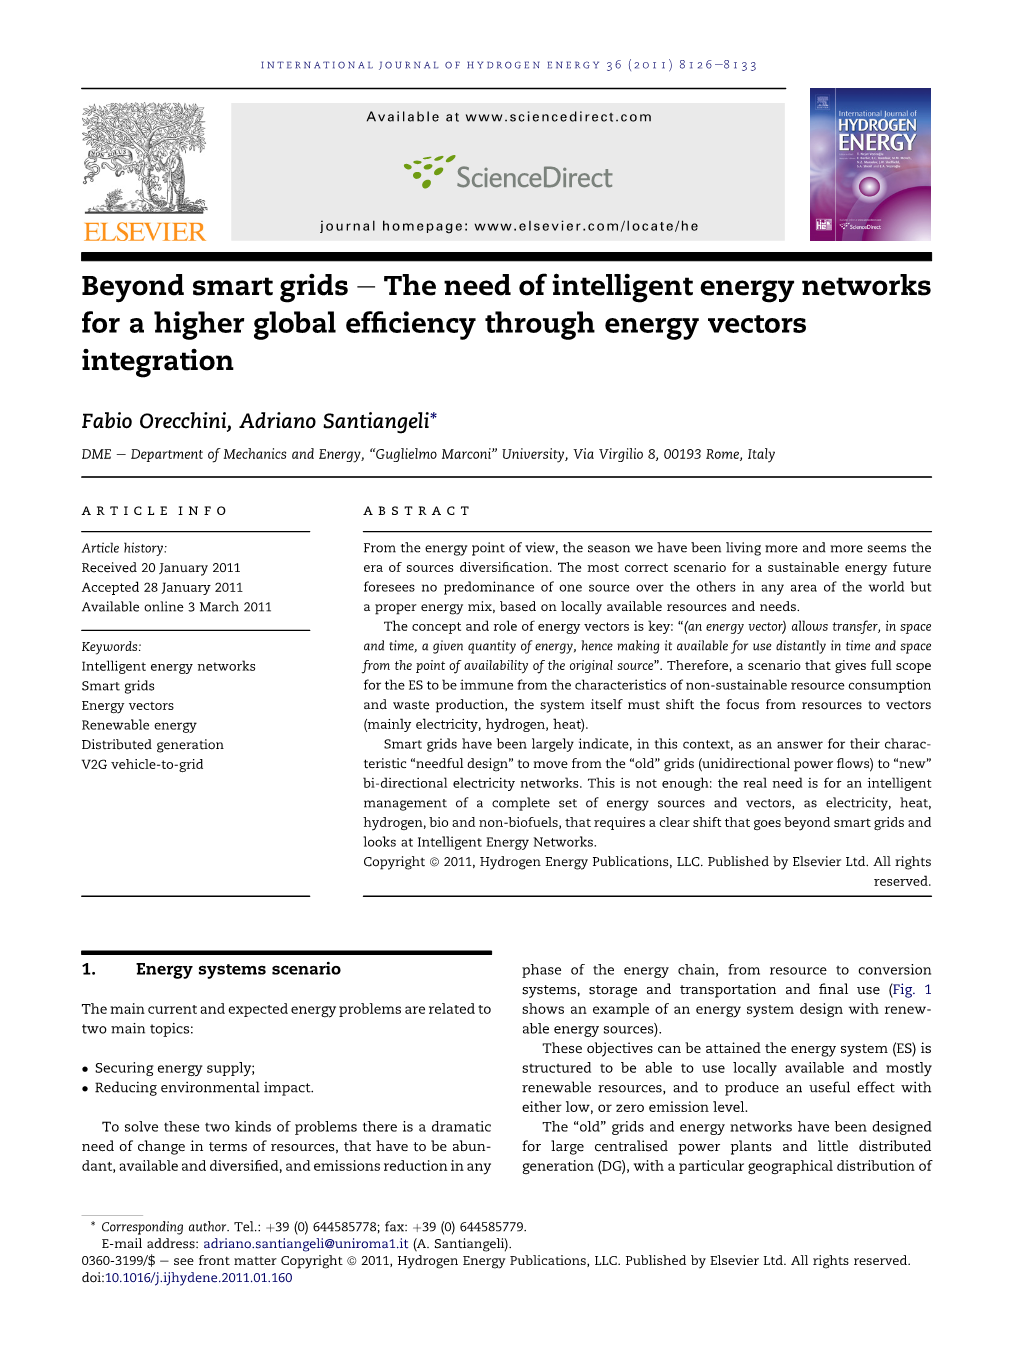 Beyond Smart Grids E the Need of Intelligent Energy Networks for a Higher Global Efﬁciency Through Energy Vectors Integration